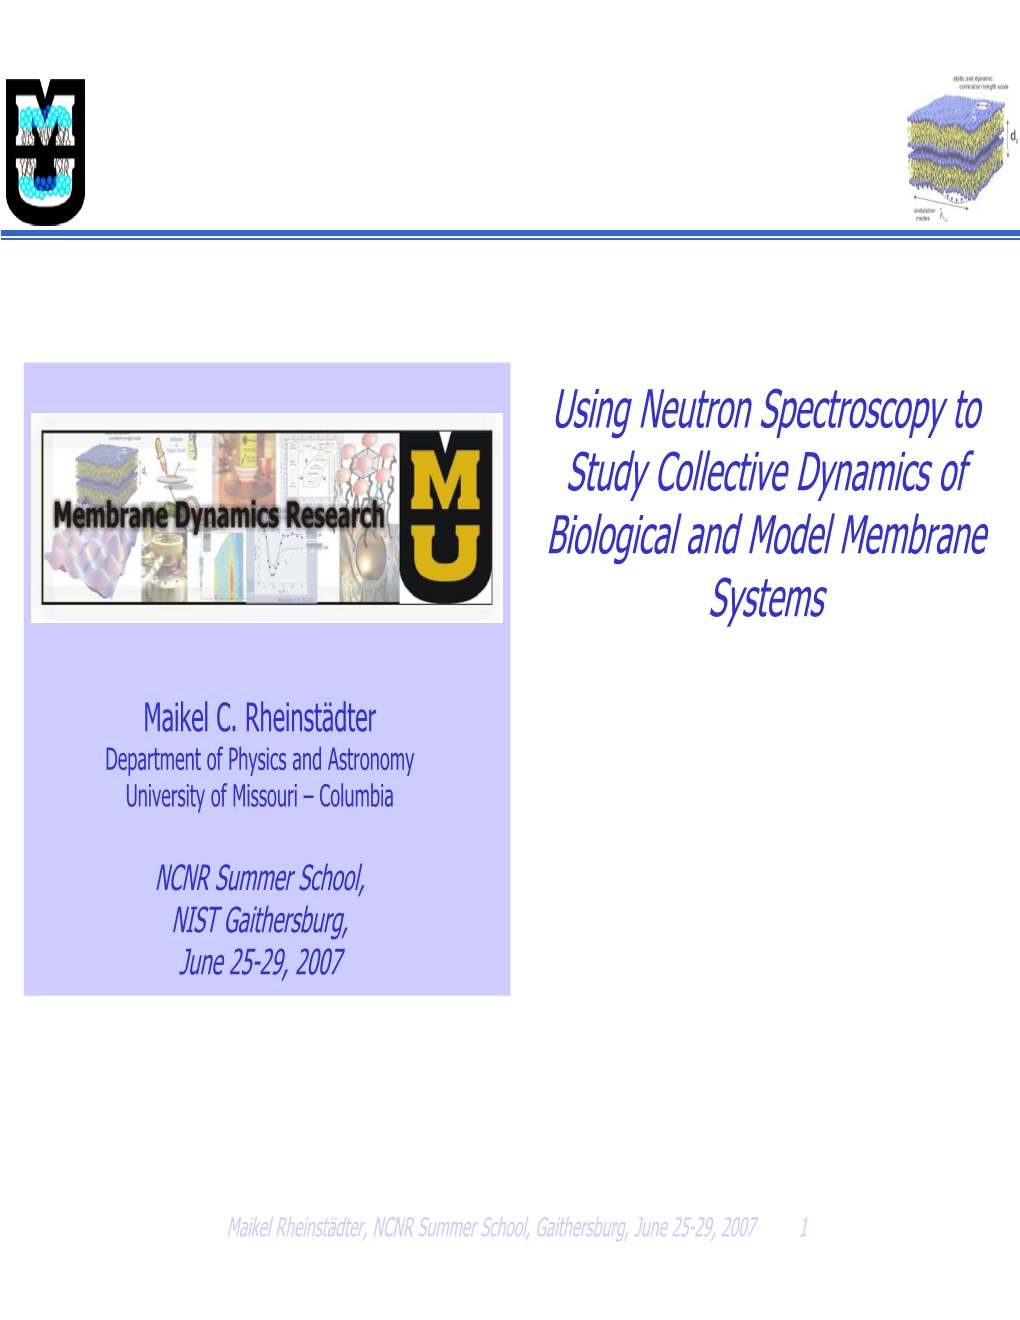 Using Neutron Spectroscopy to Study Collective Dynamics of Biological